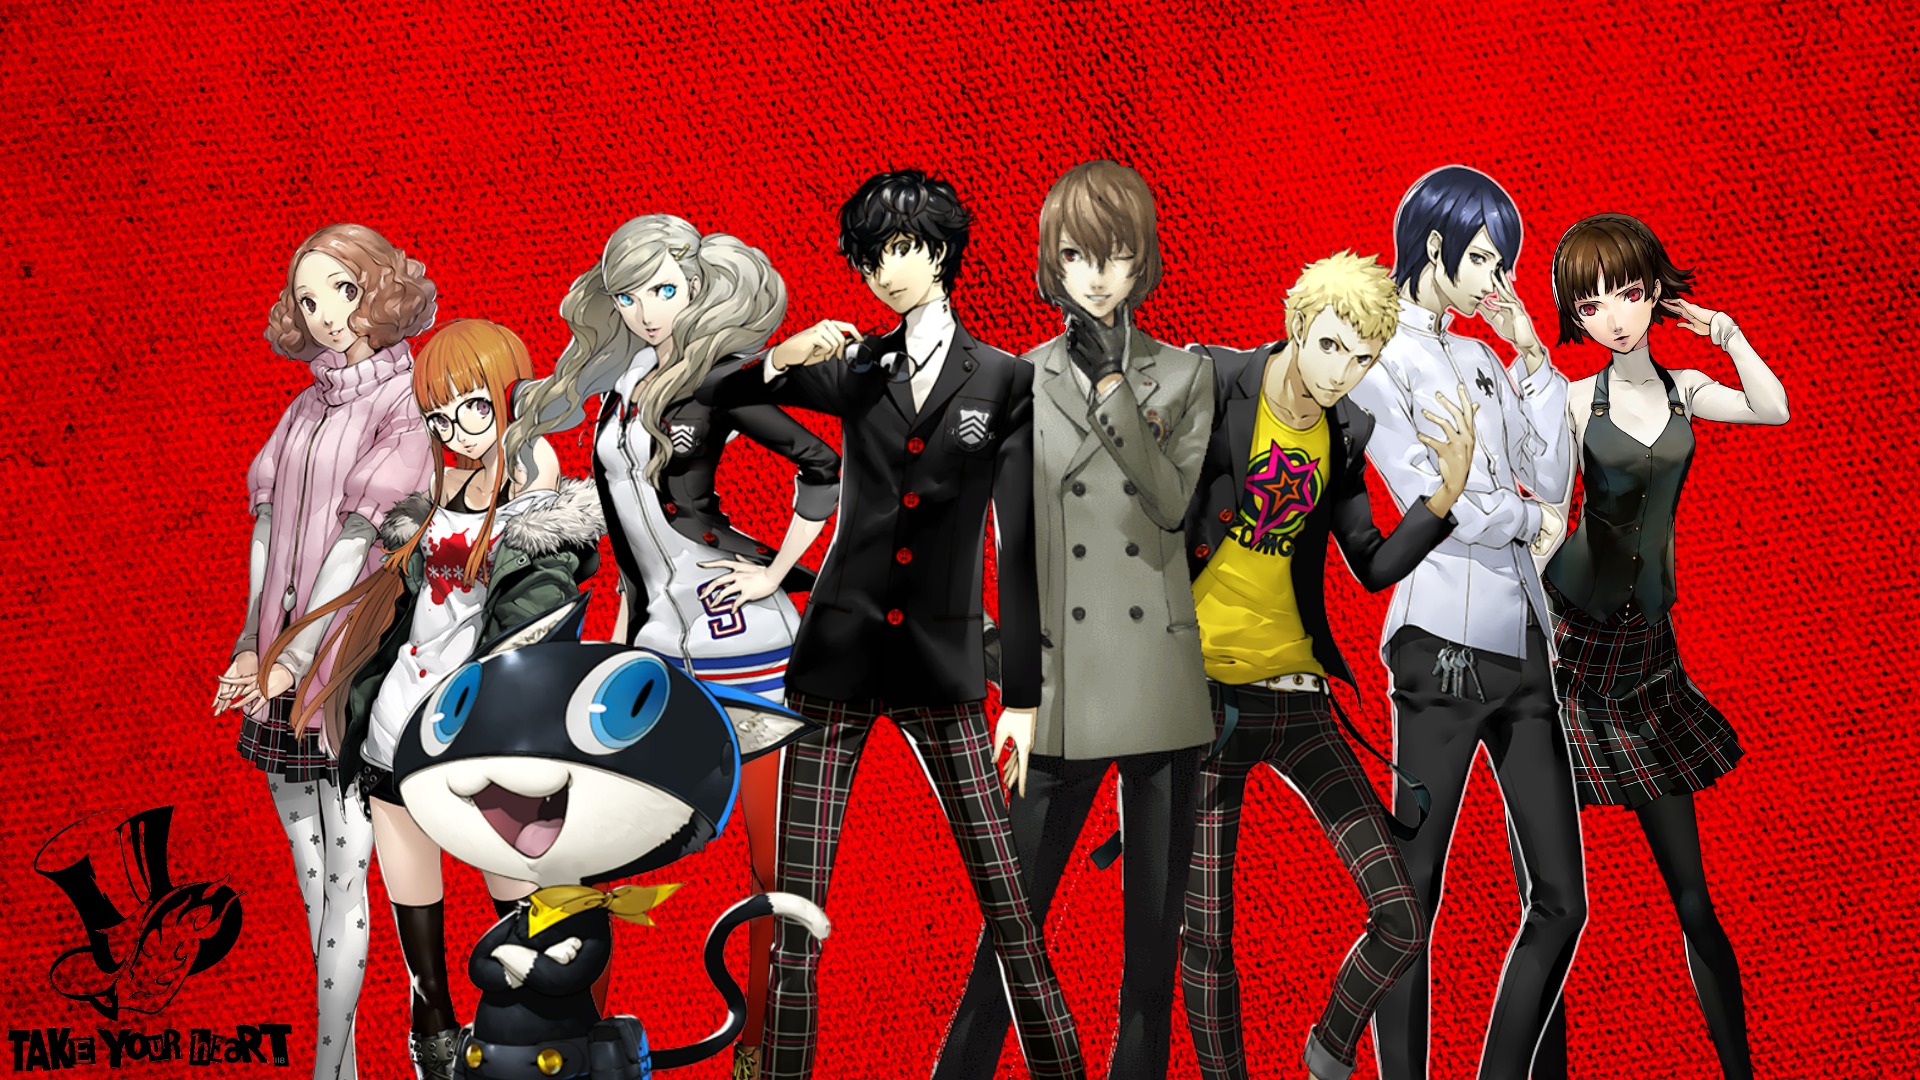 Persona 5 Wallpaper (Updated with Color) by jaekob13 on DeviantArt